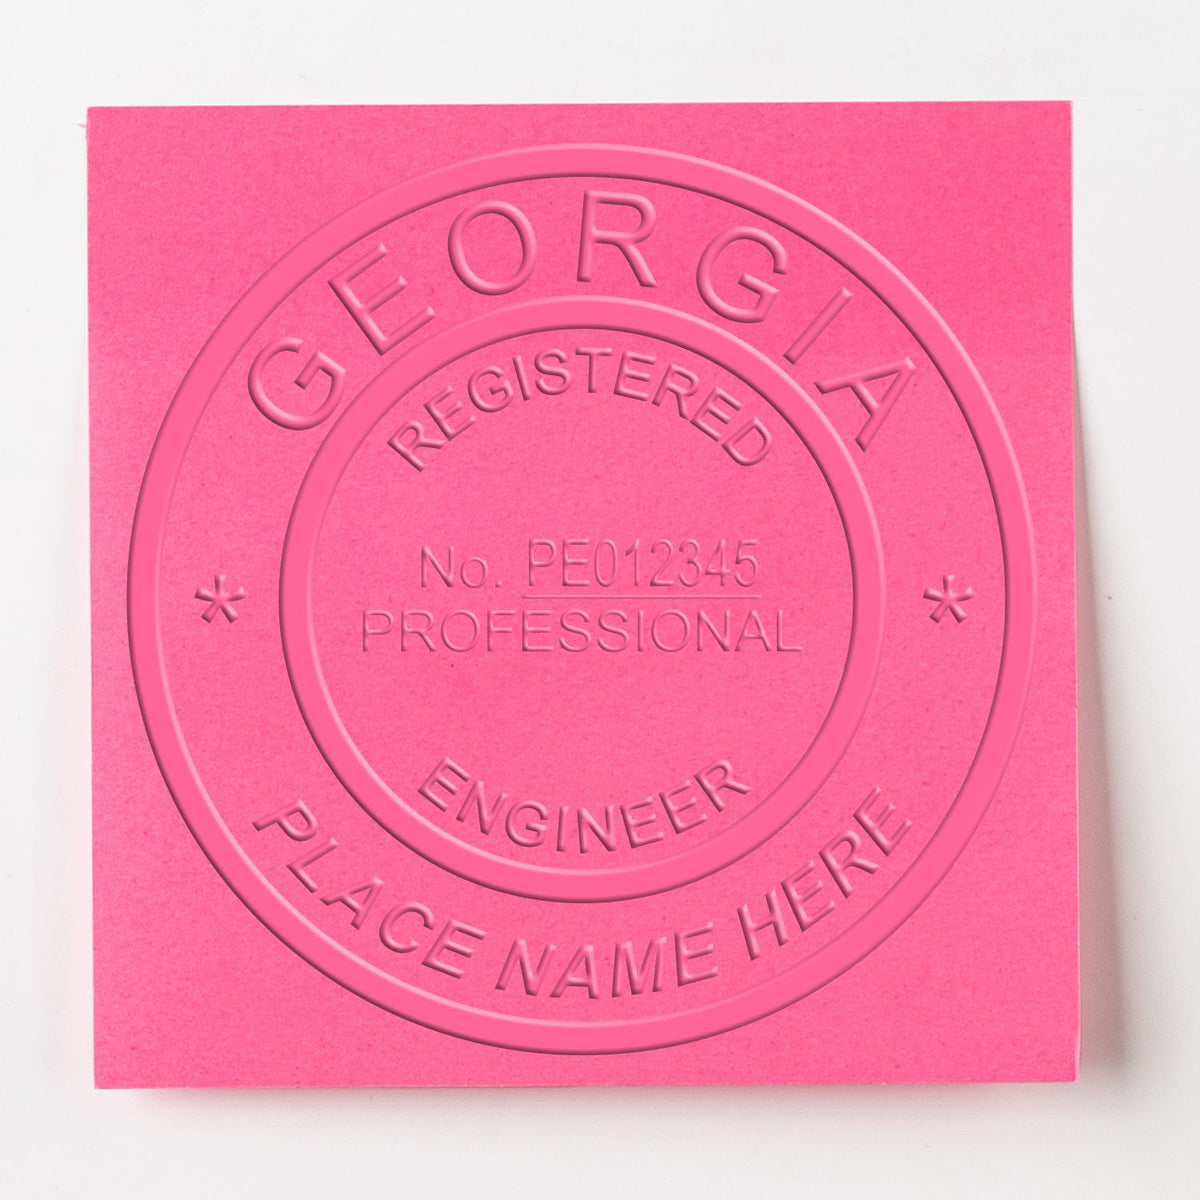 An alternative view of the Long Reach Georgia PE Seal stamped on a sheet of paper showing the image in use